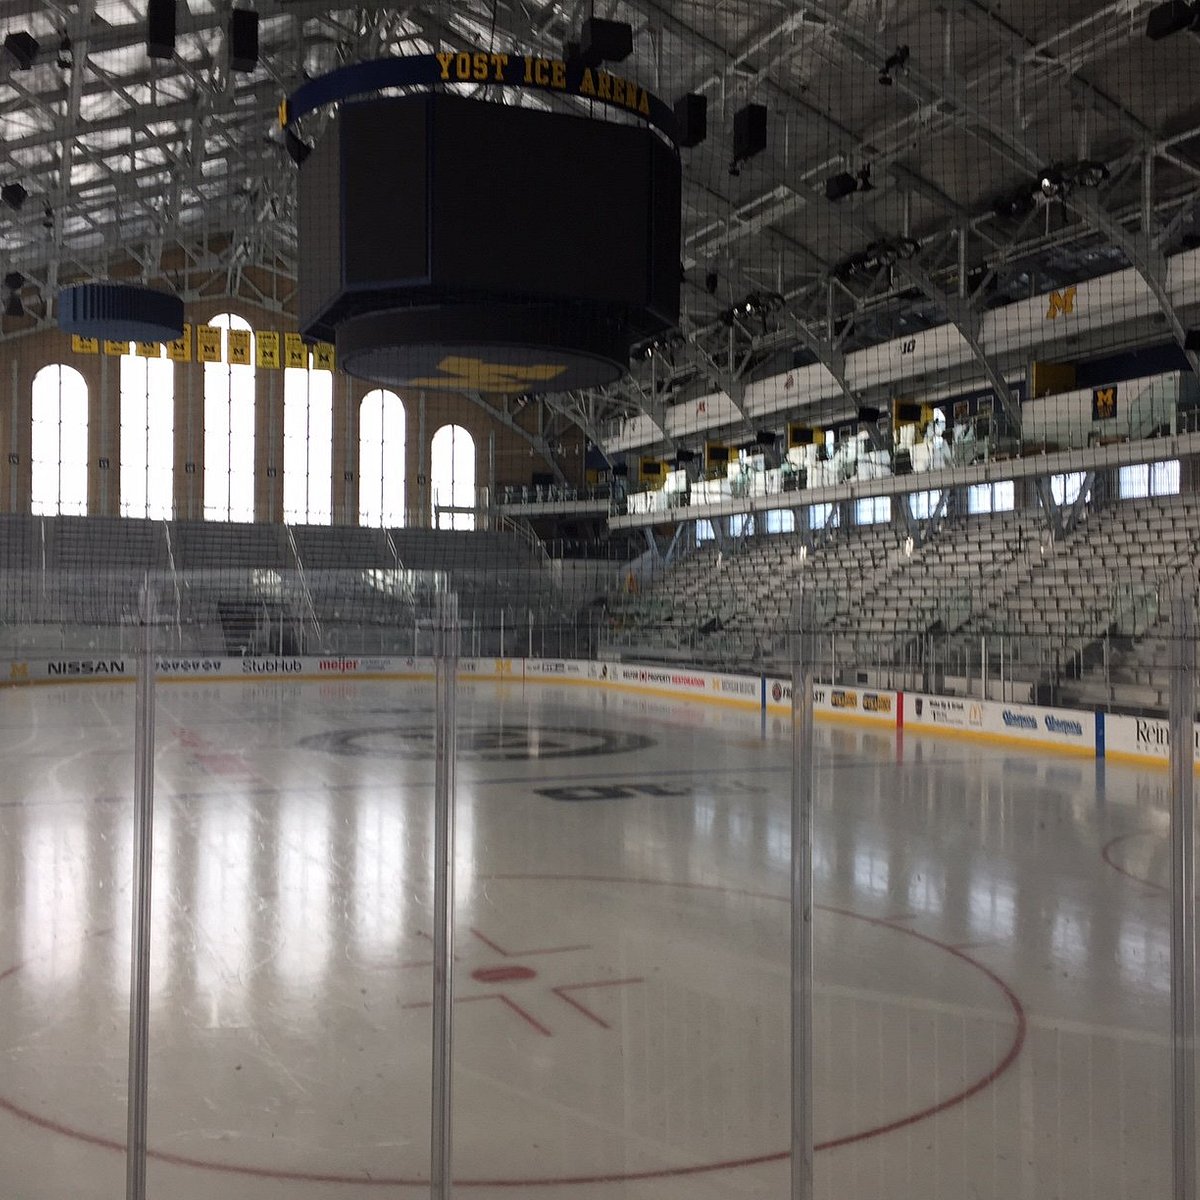 YOST ICE ARENA (Ann Arbor) What to Know BEFORE You Go